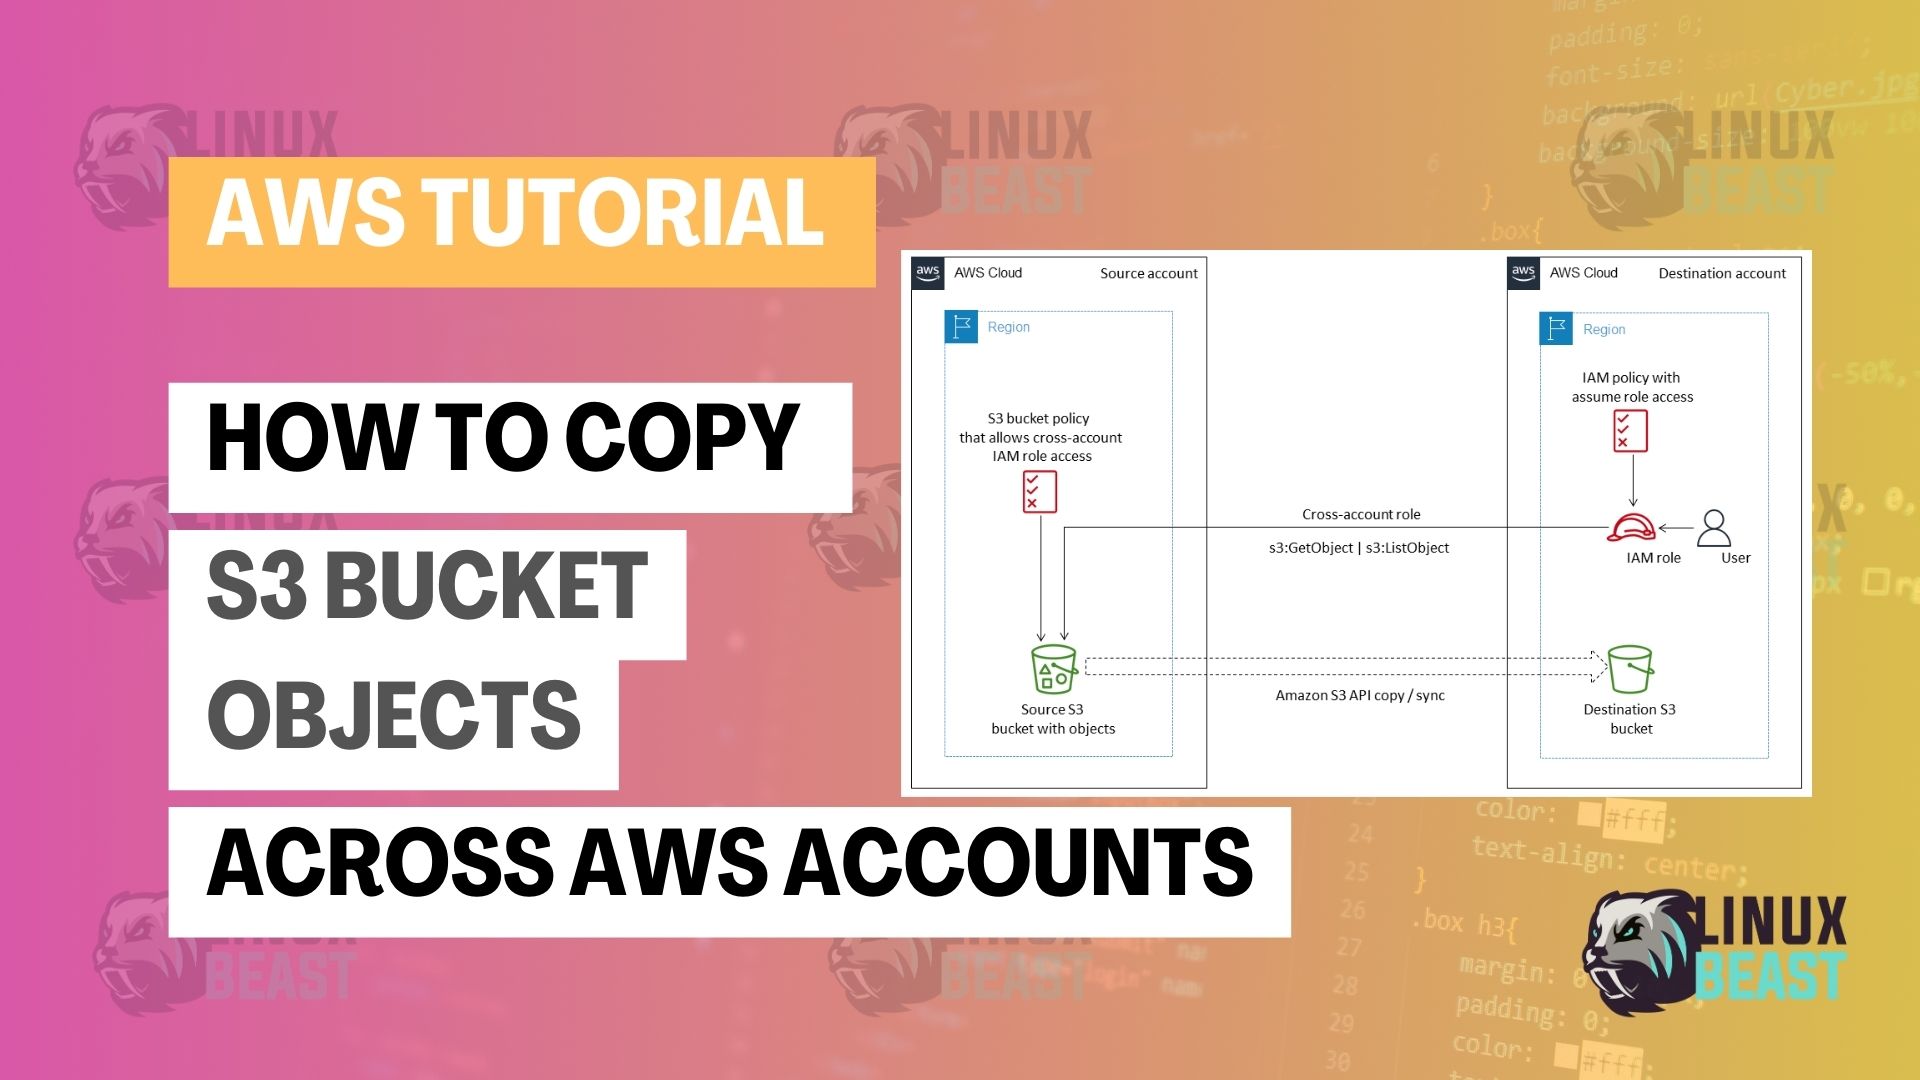 How to Copy S3 Bucket Objects Across AWS Accounts